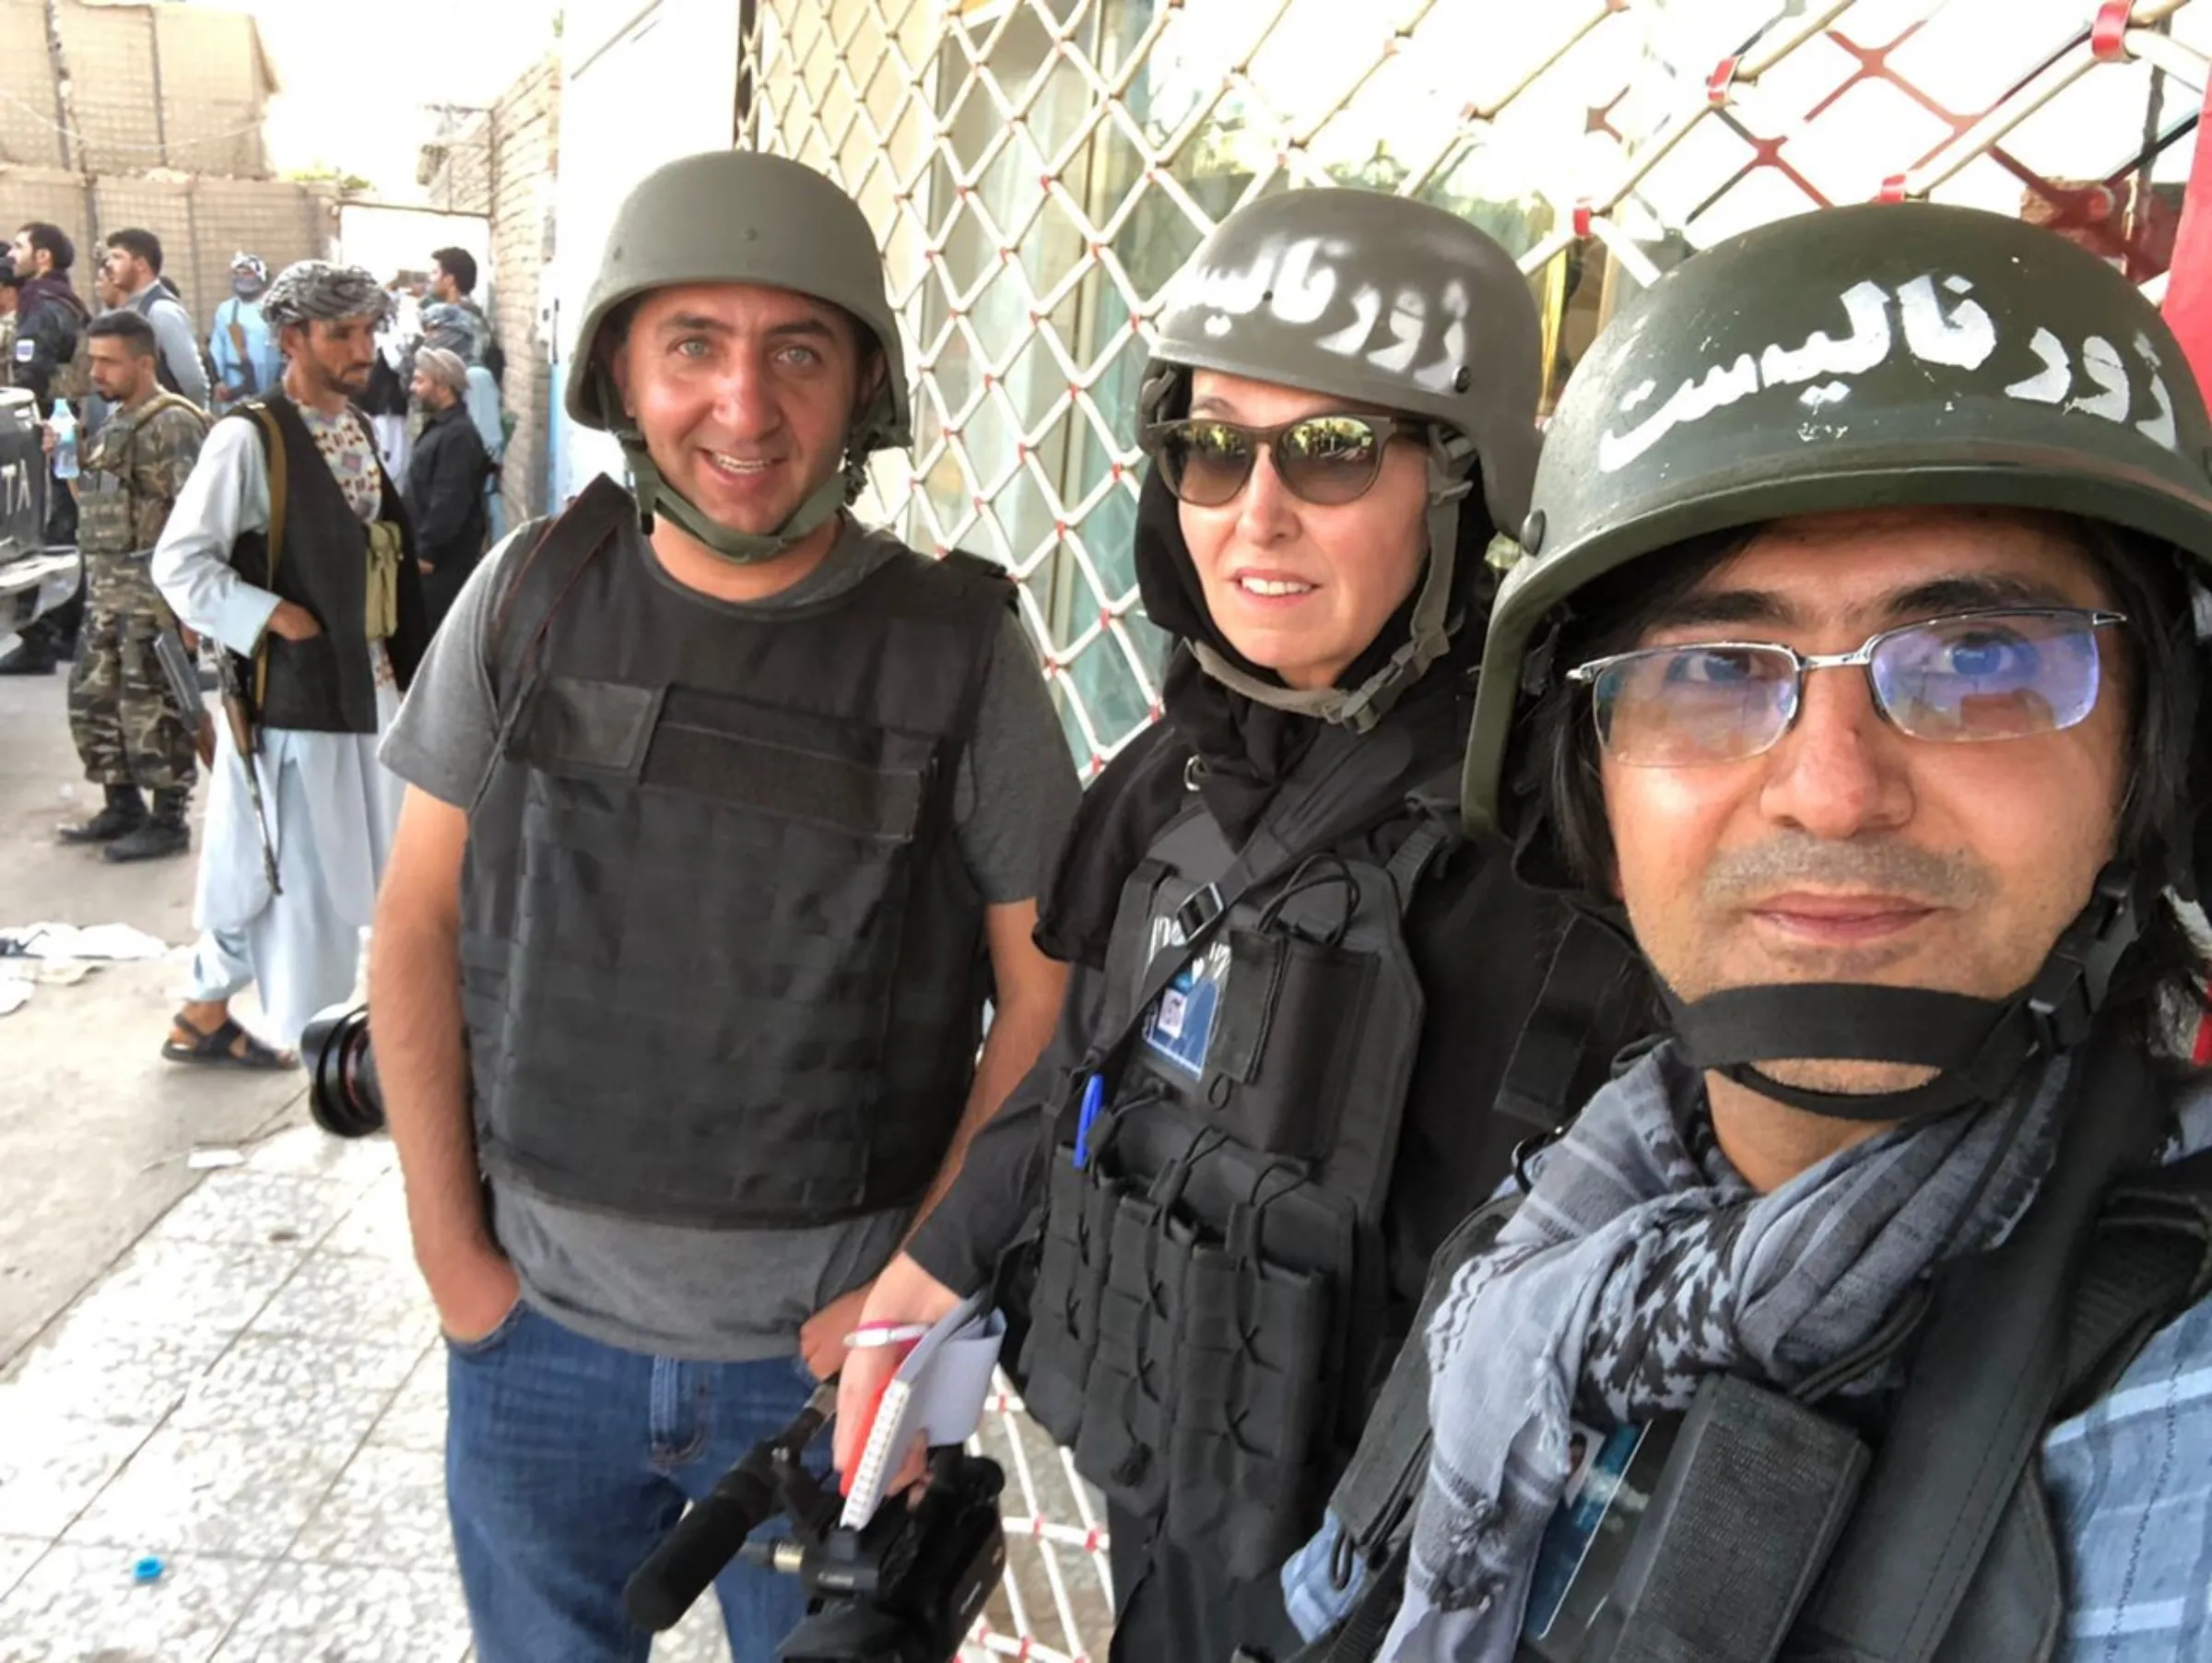 Three people stand in helmets by a chain fence smiling at the camera